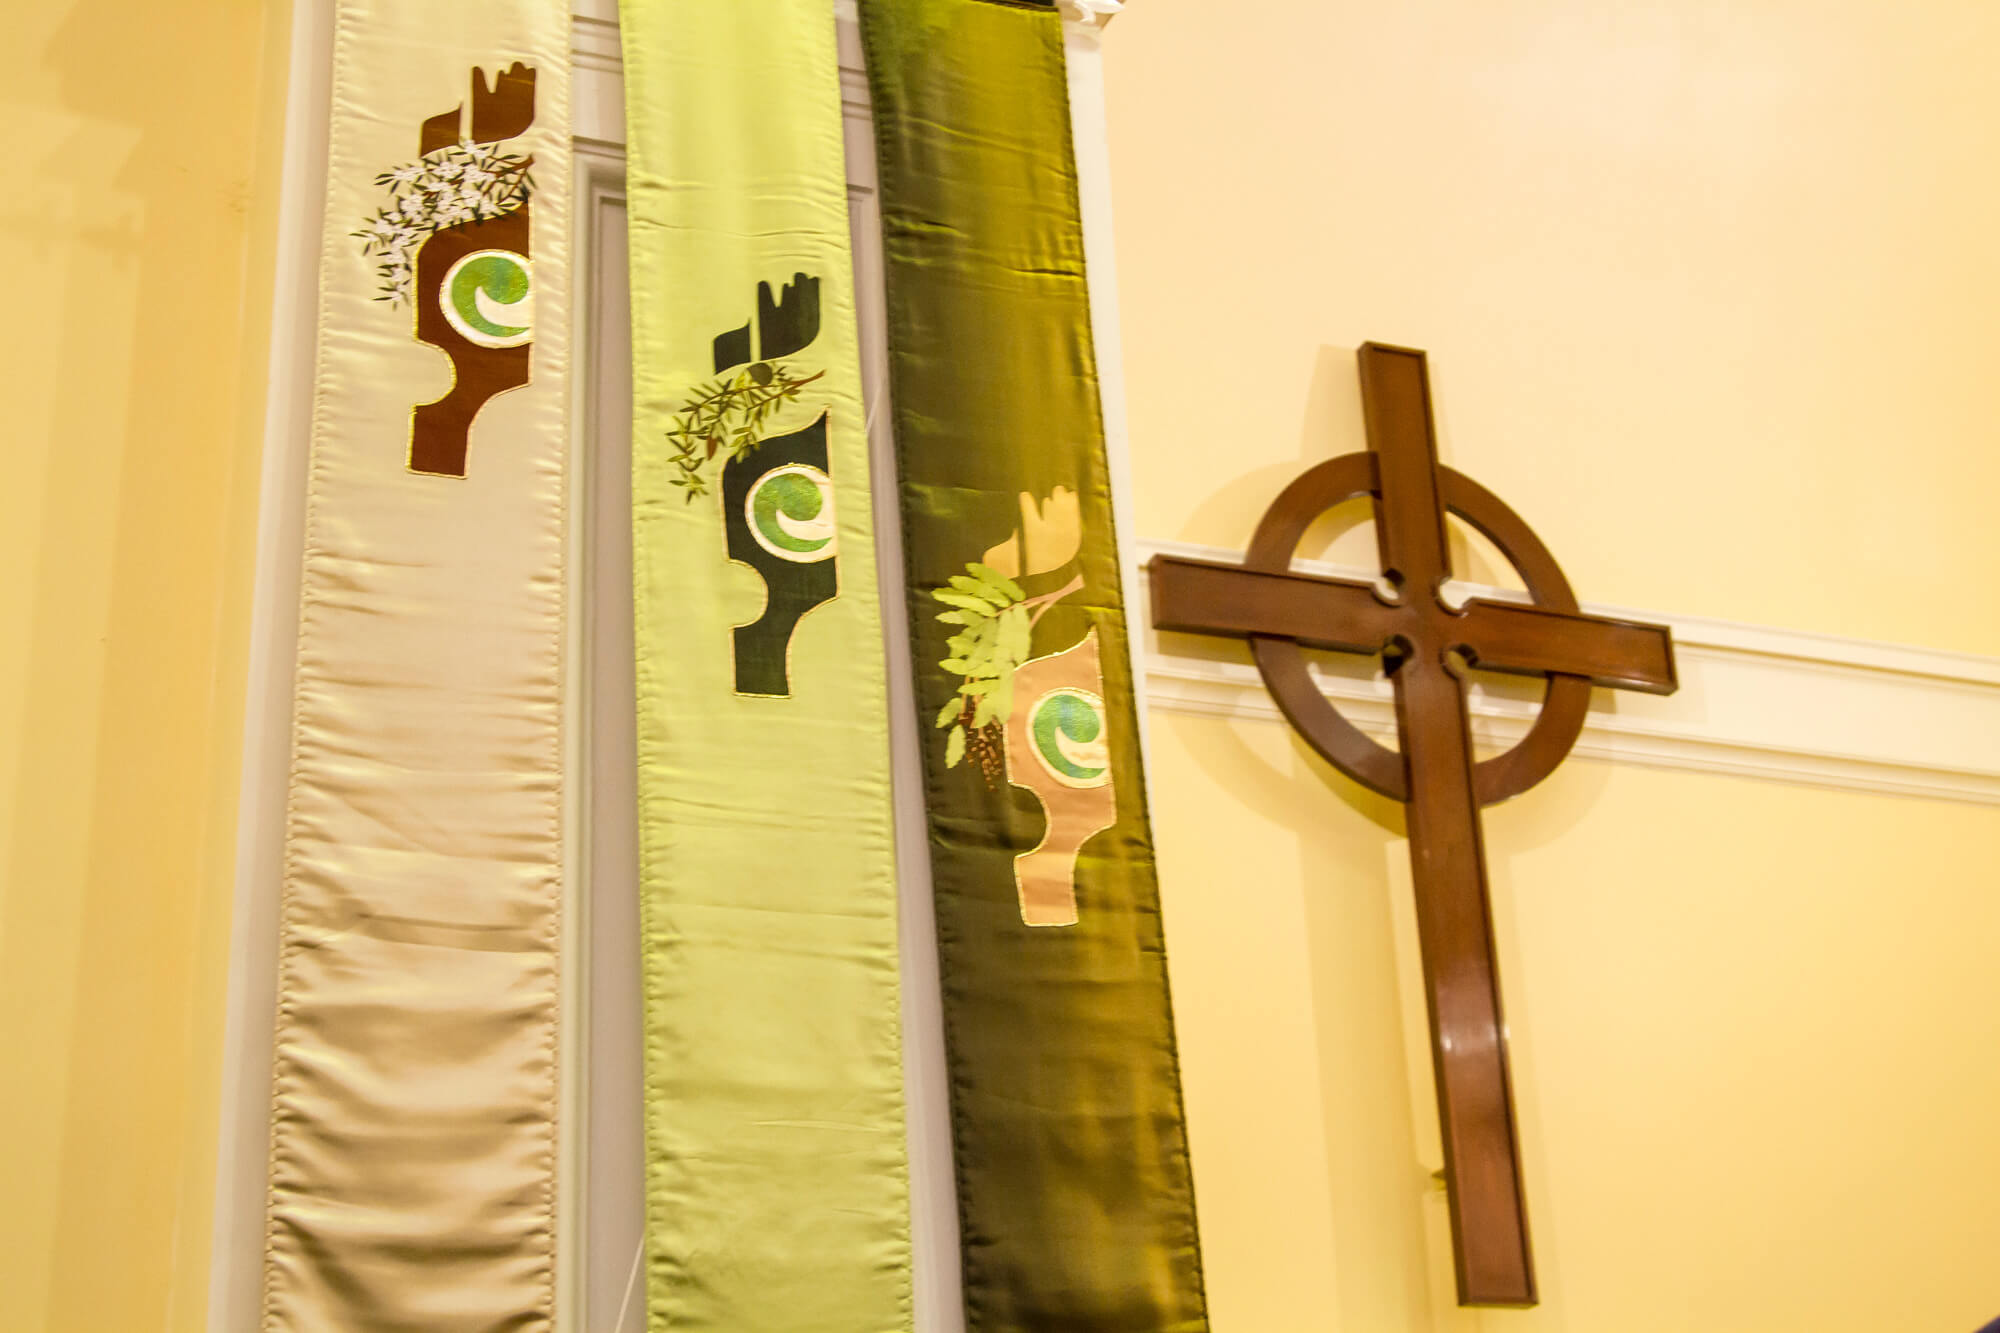 Banners in St Andrew's next to the presbyterian cross